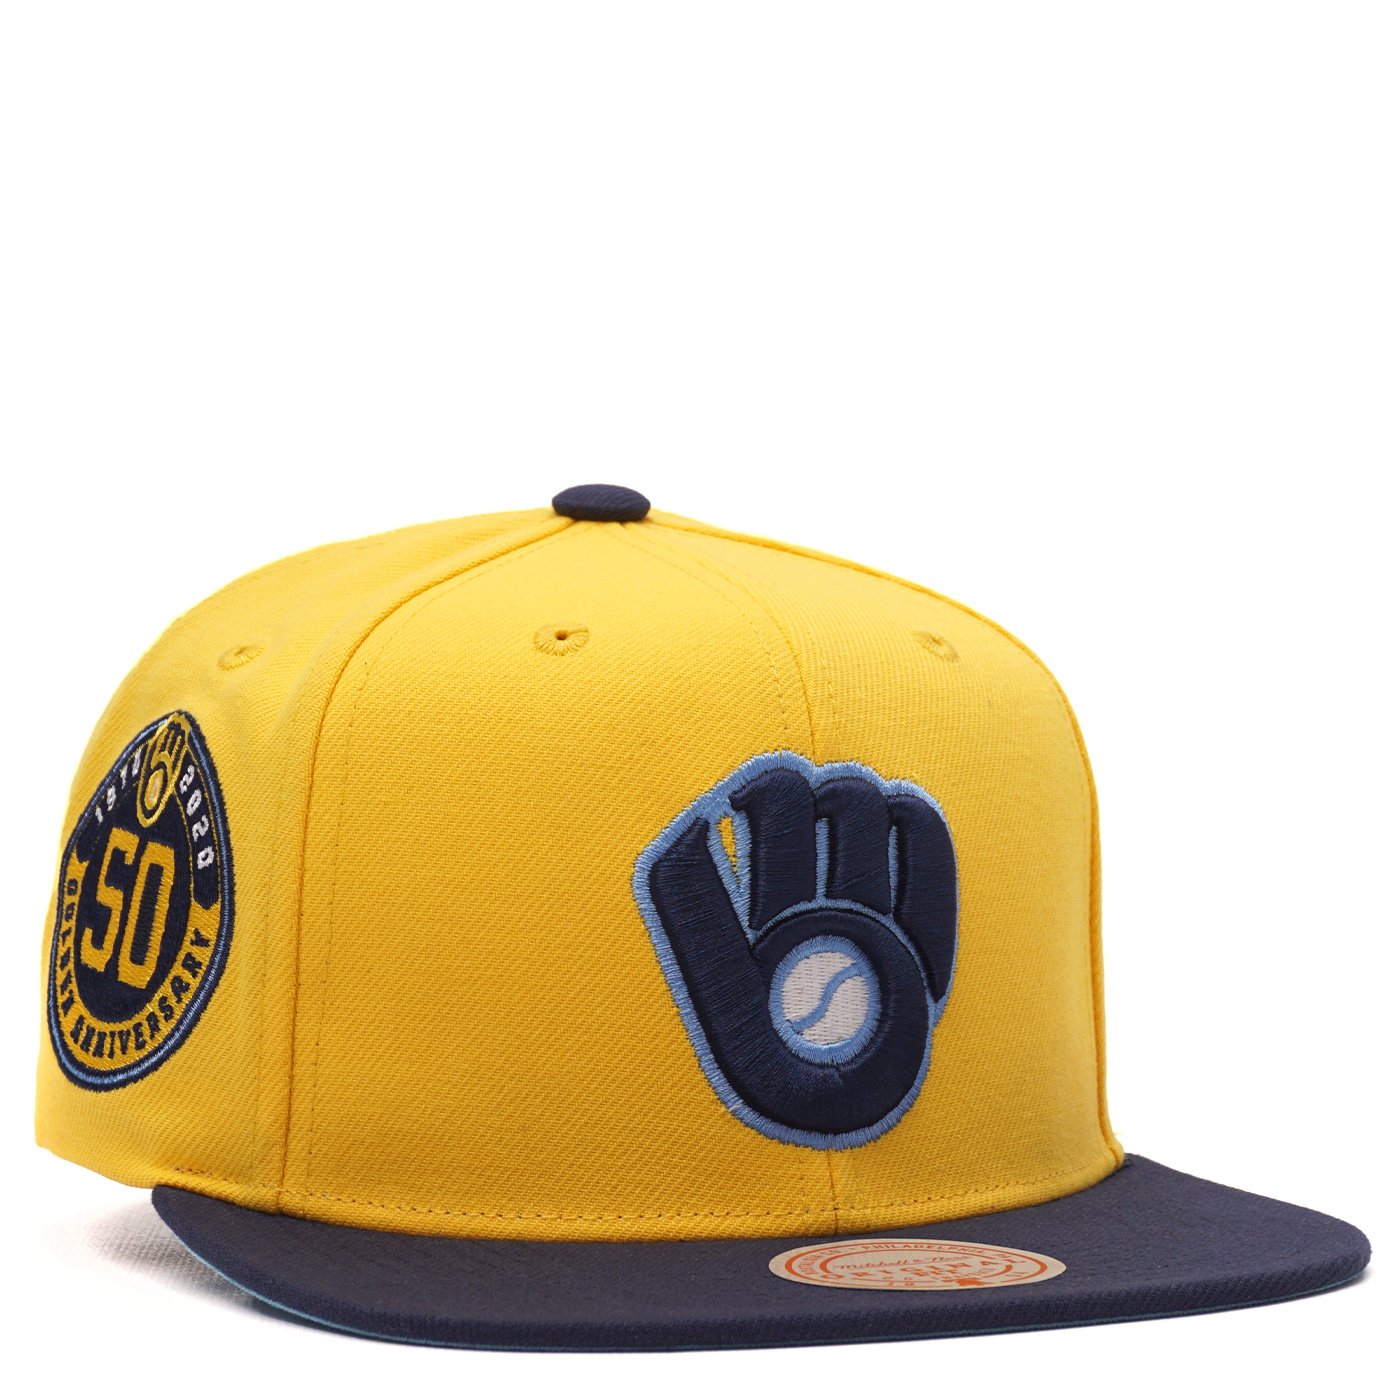 New Era Washington Nationals Yellow/Black Grilled 59FIFTY Fitted Hat